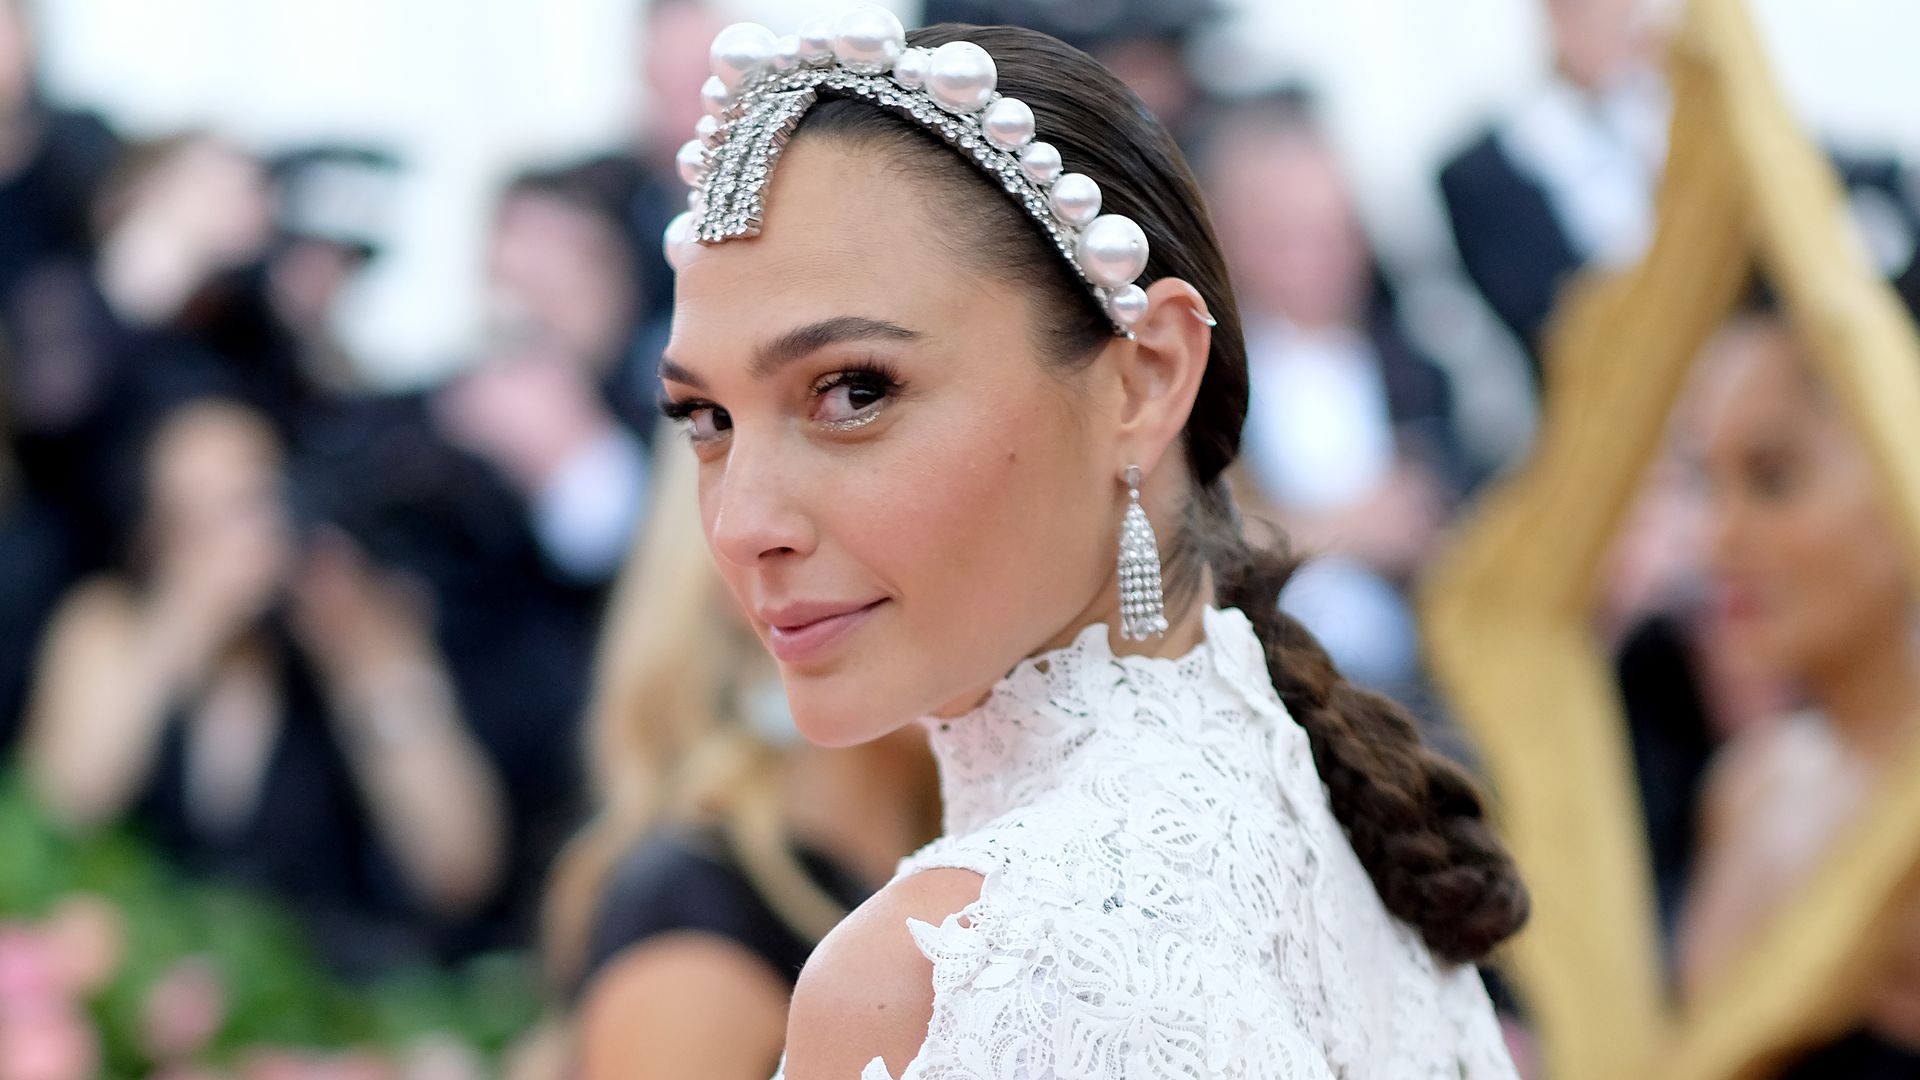 NEW YORK, NEW YORK - MAY 06: Gal Gadot attends The 2019 Met Gala Celebrating Camp: Notes on Fashion at Metropolitan Museum of Art on May 06, 2019 in New York City. (Photo by Dimitrios Kambouris/Getty Images for The Met Museum/Vogue)